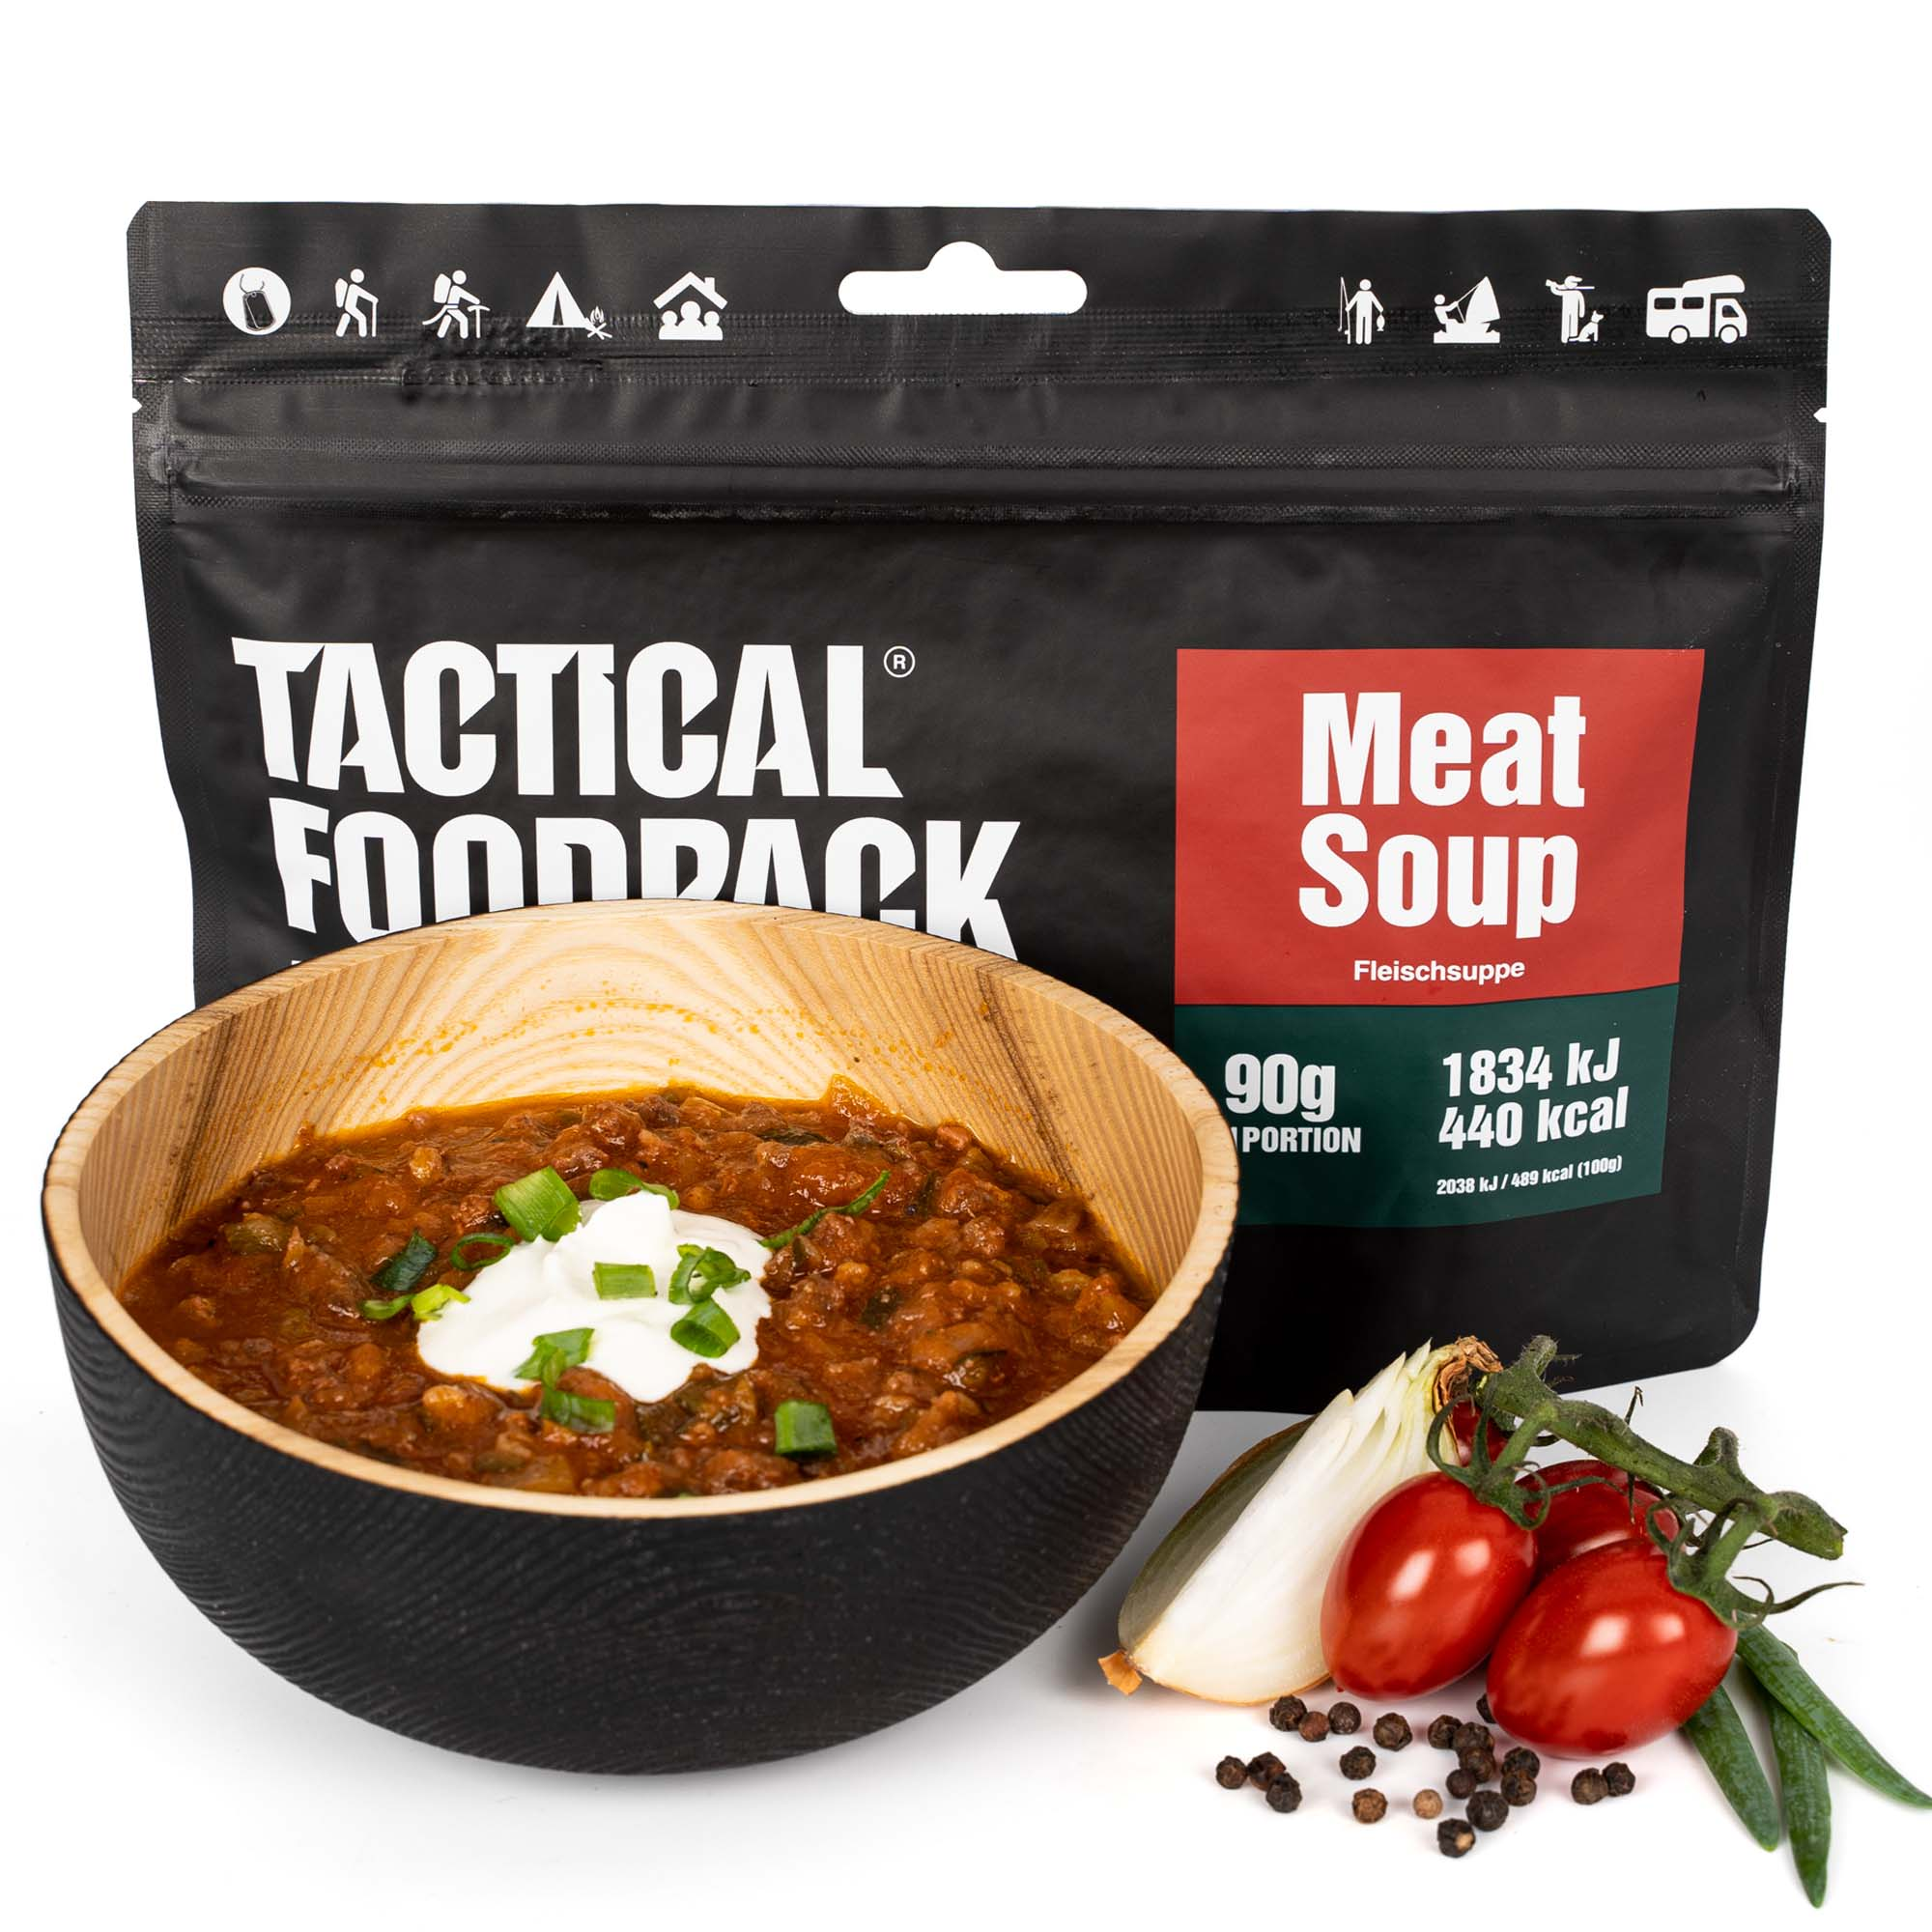 Tactical Foodpack® Meat Soup- 100% natural food